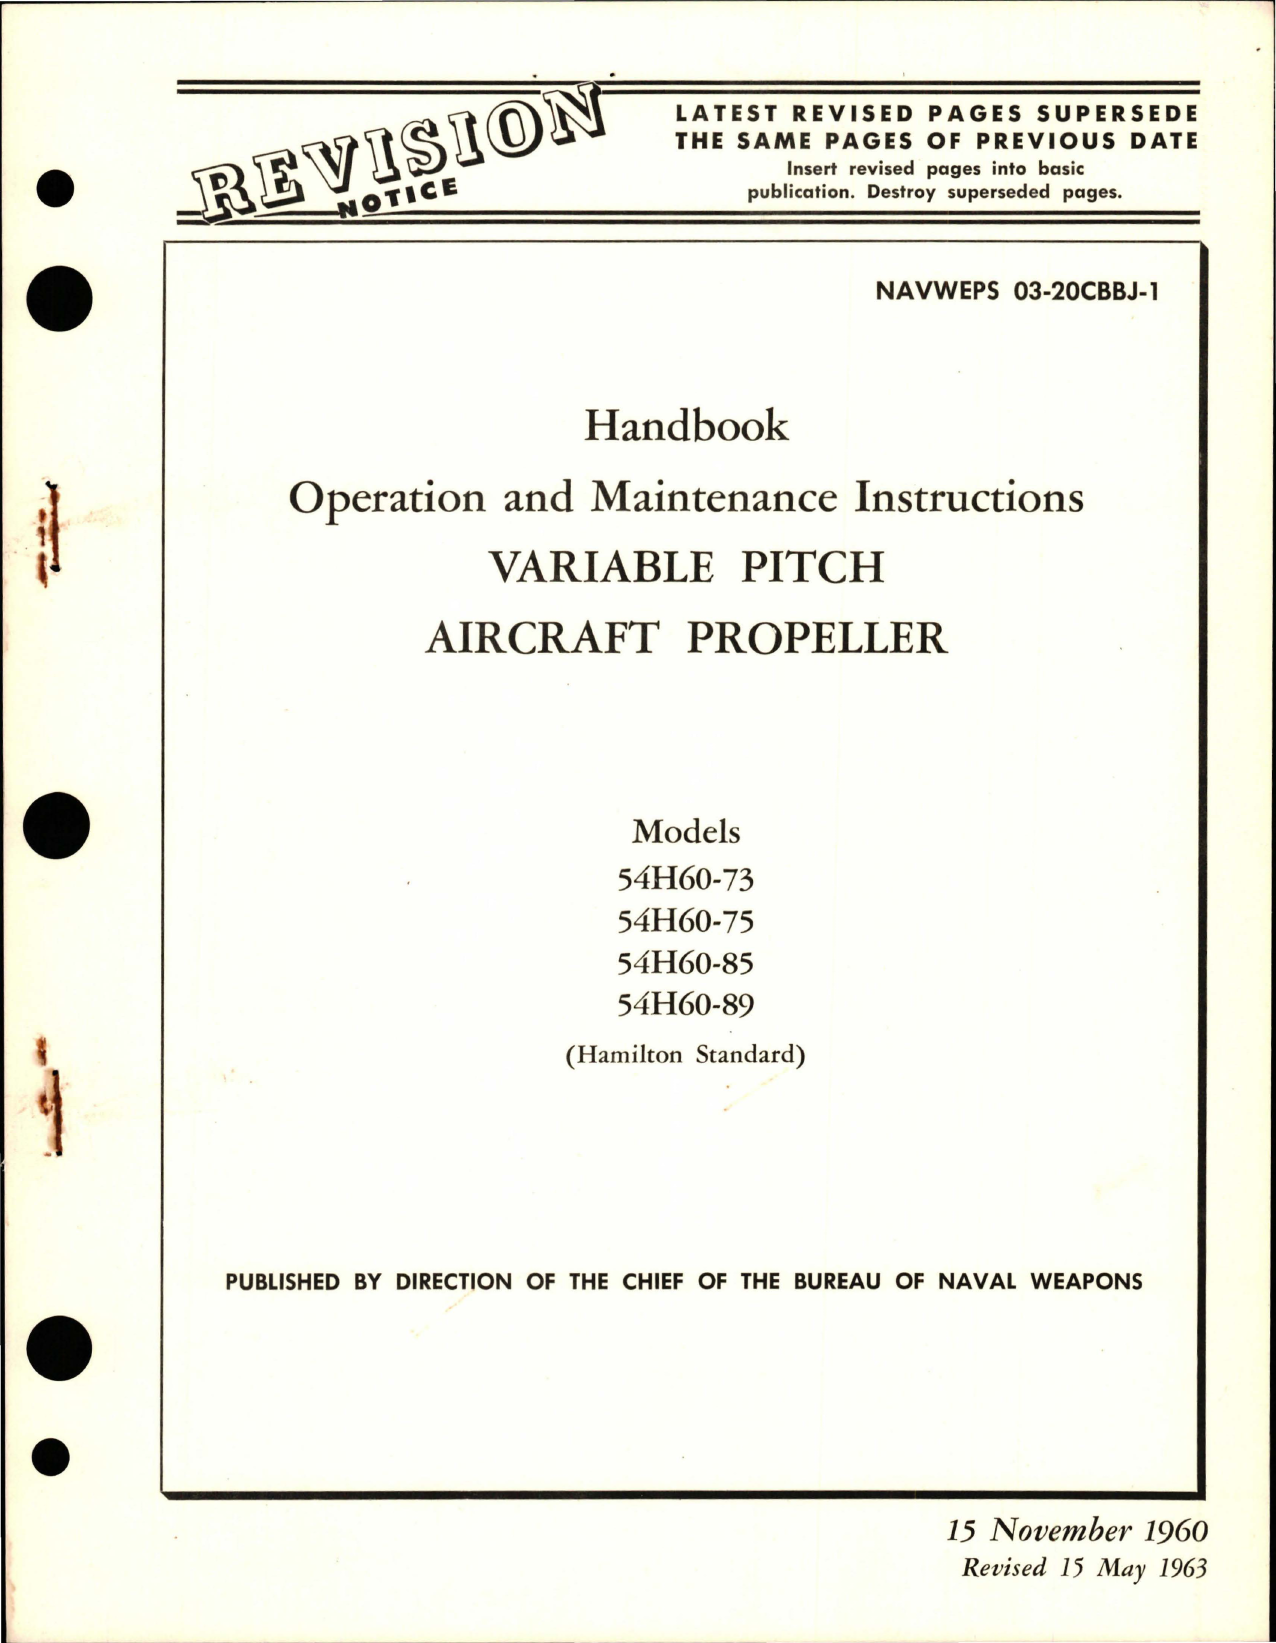 Sample page 1 from AirCorps Library document: Operation and Maintenance Instructions for Variable Pitch Propeller - Models 54H60-73, 54H60-75, 54H60-85, and 54H60-89